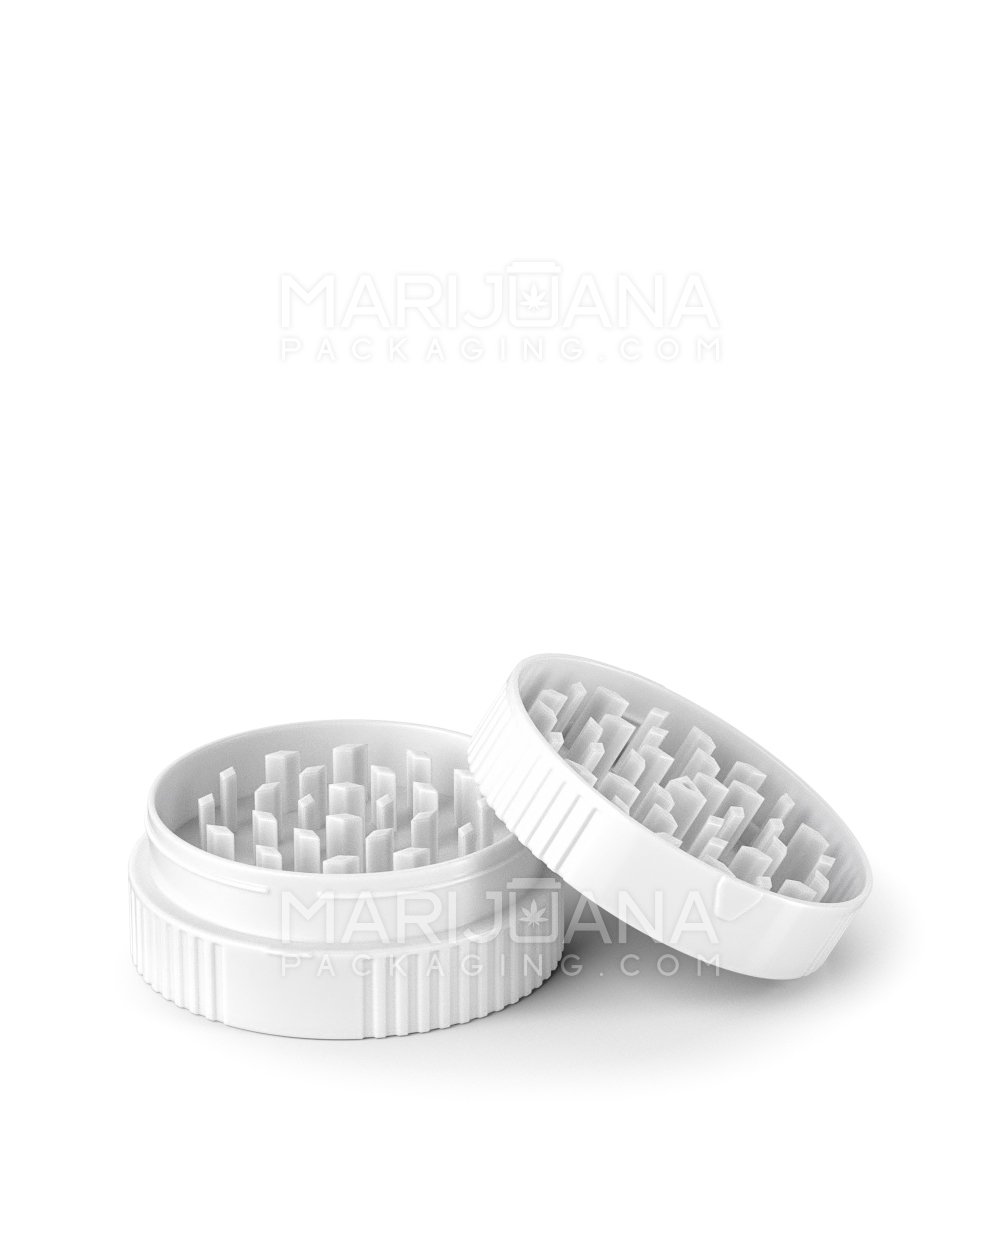 Child Resistant | Push & Turn Vial with Grinder Cap | 60dr - White Plastic - 100 Count - 6